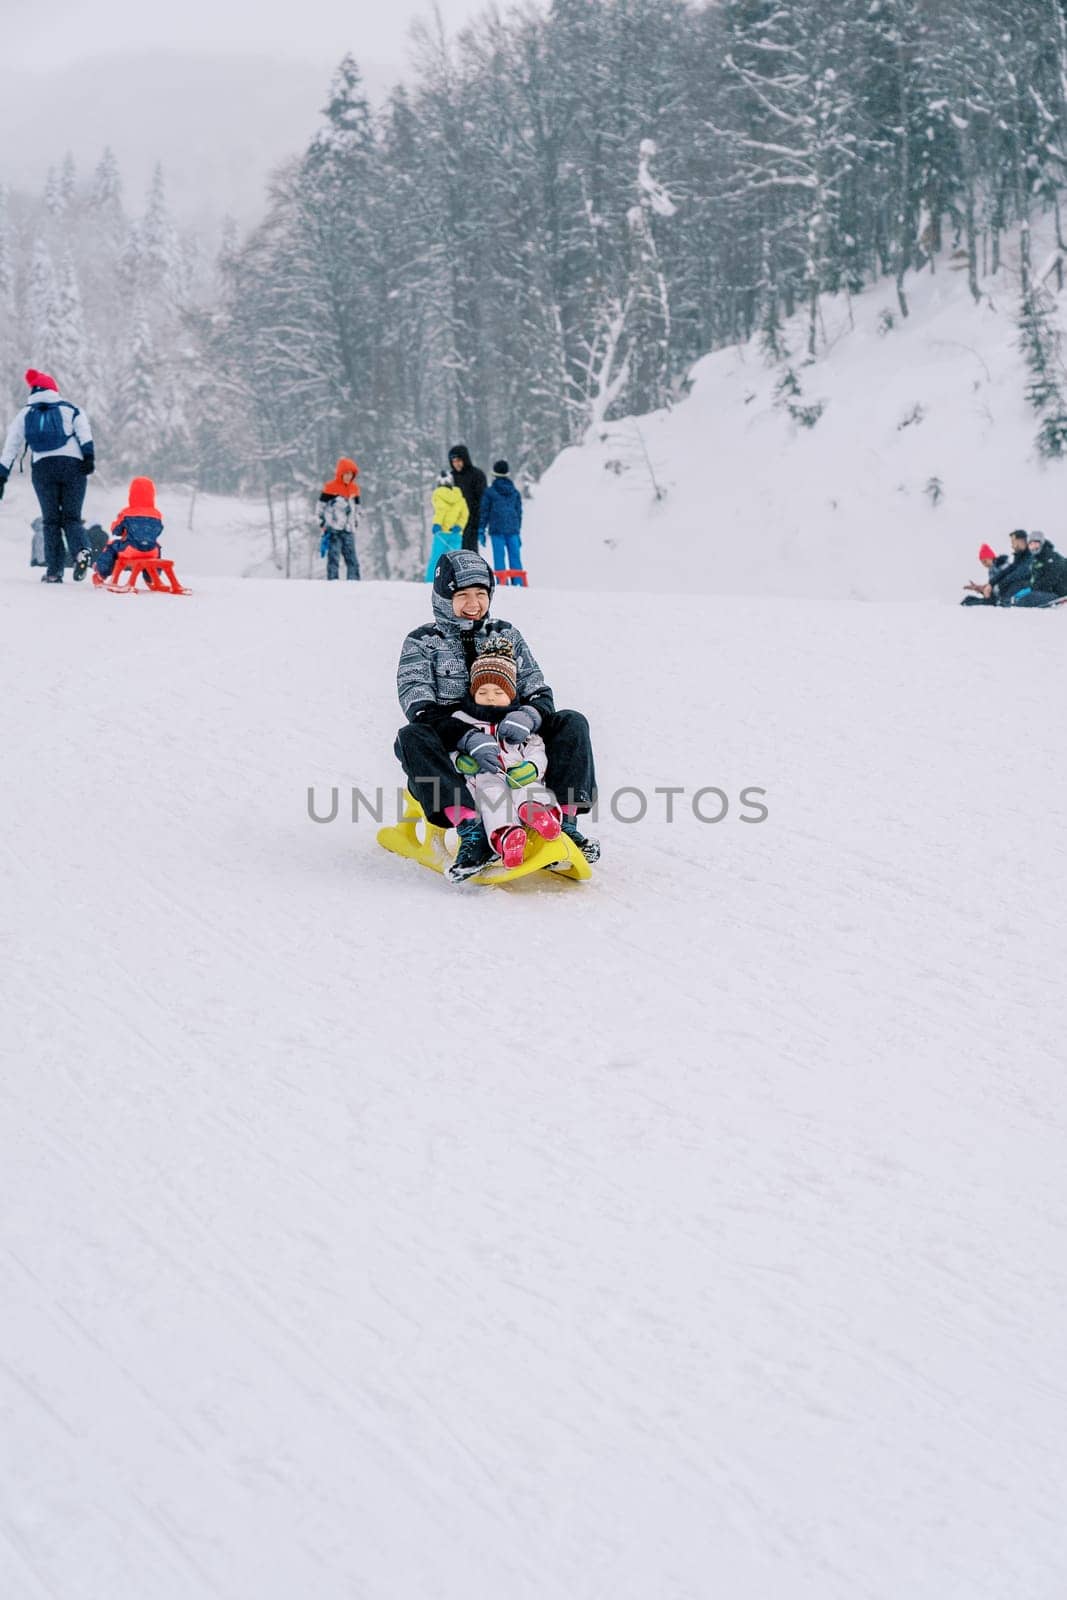 Smiling mother with a small child goes down the slope of a snowy mountain on a sled by Nadtochiy